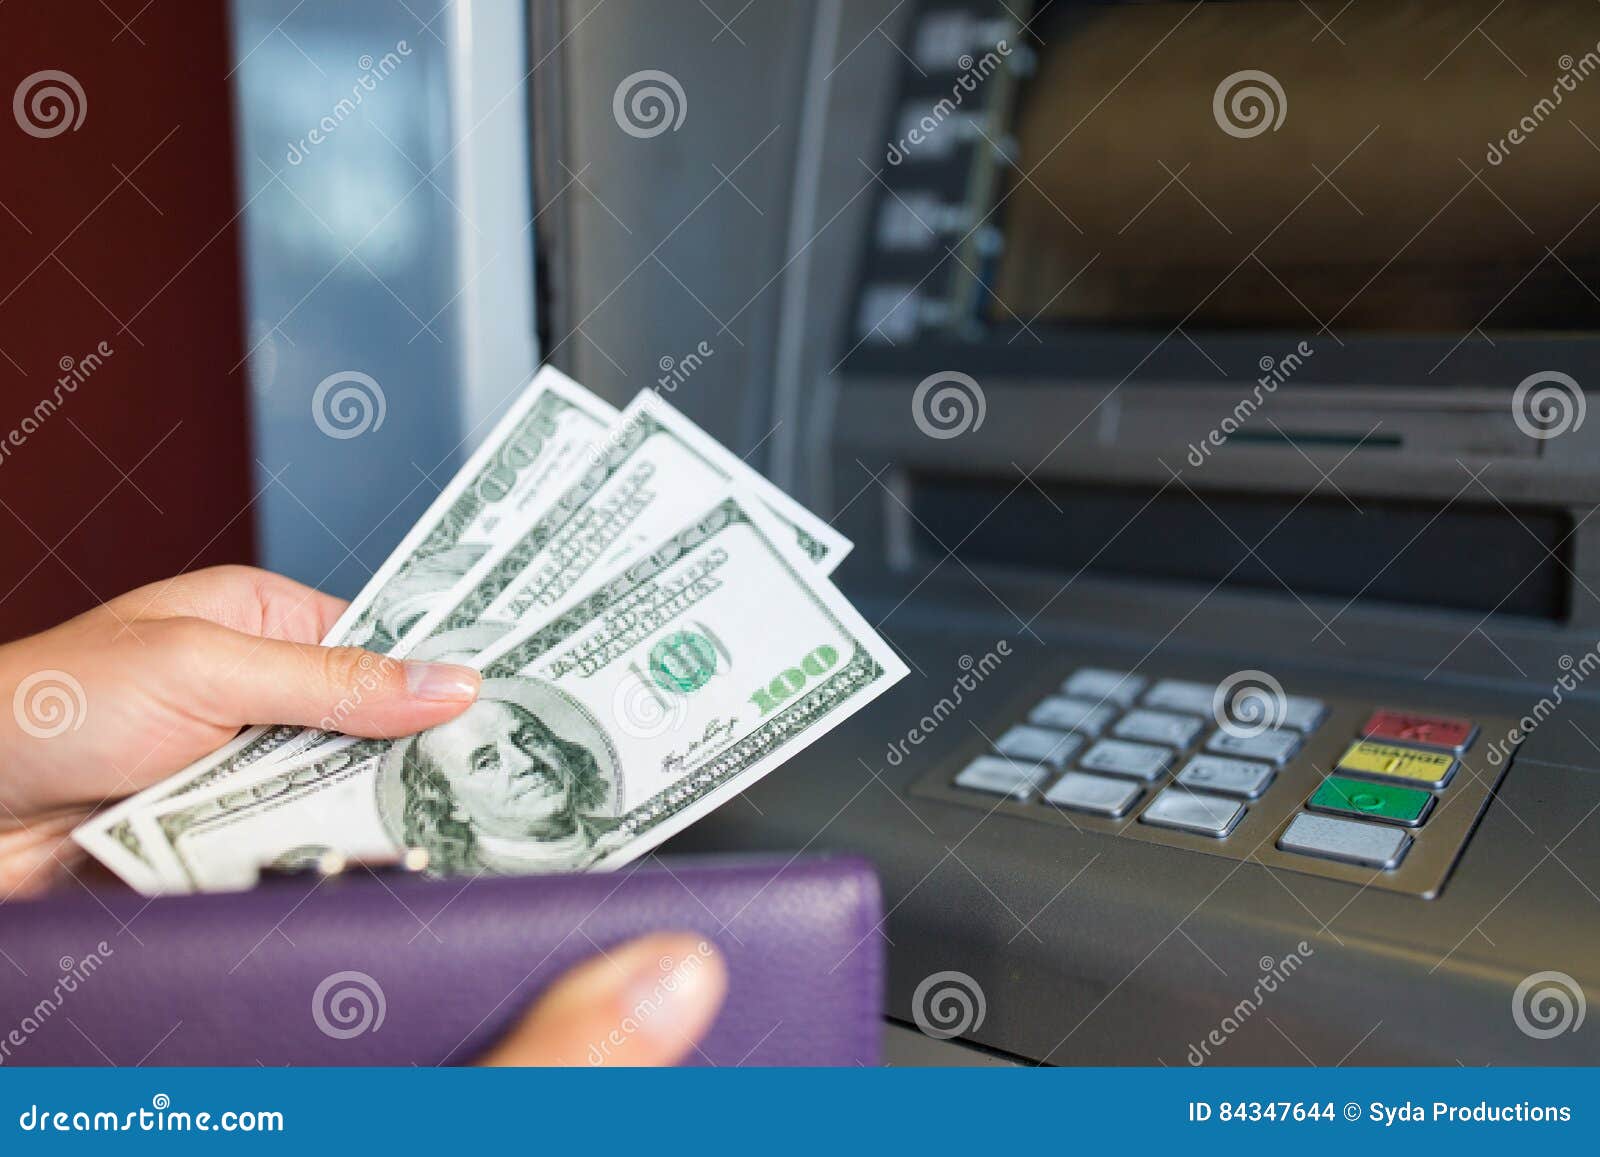 close up of hand withdrawing money at atm machine